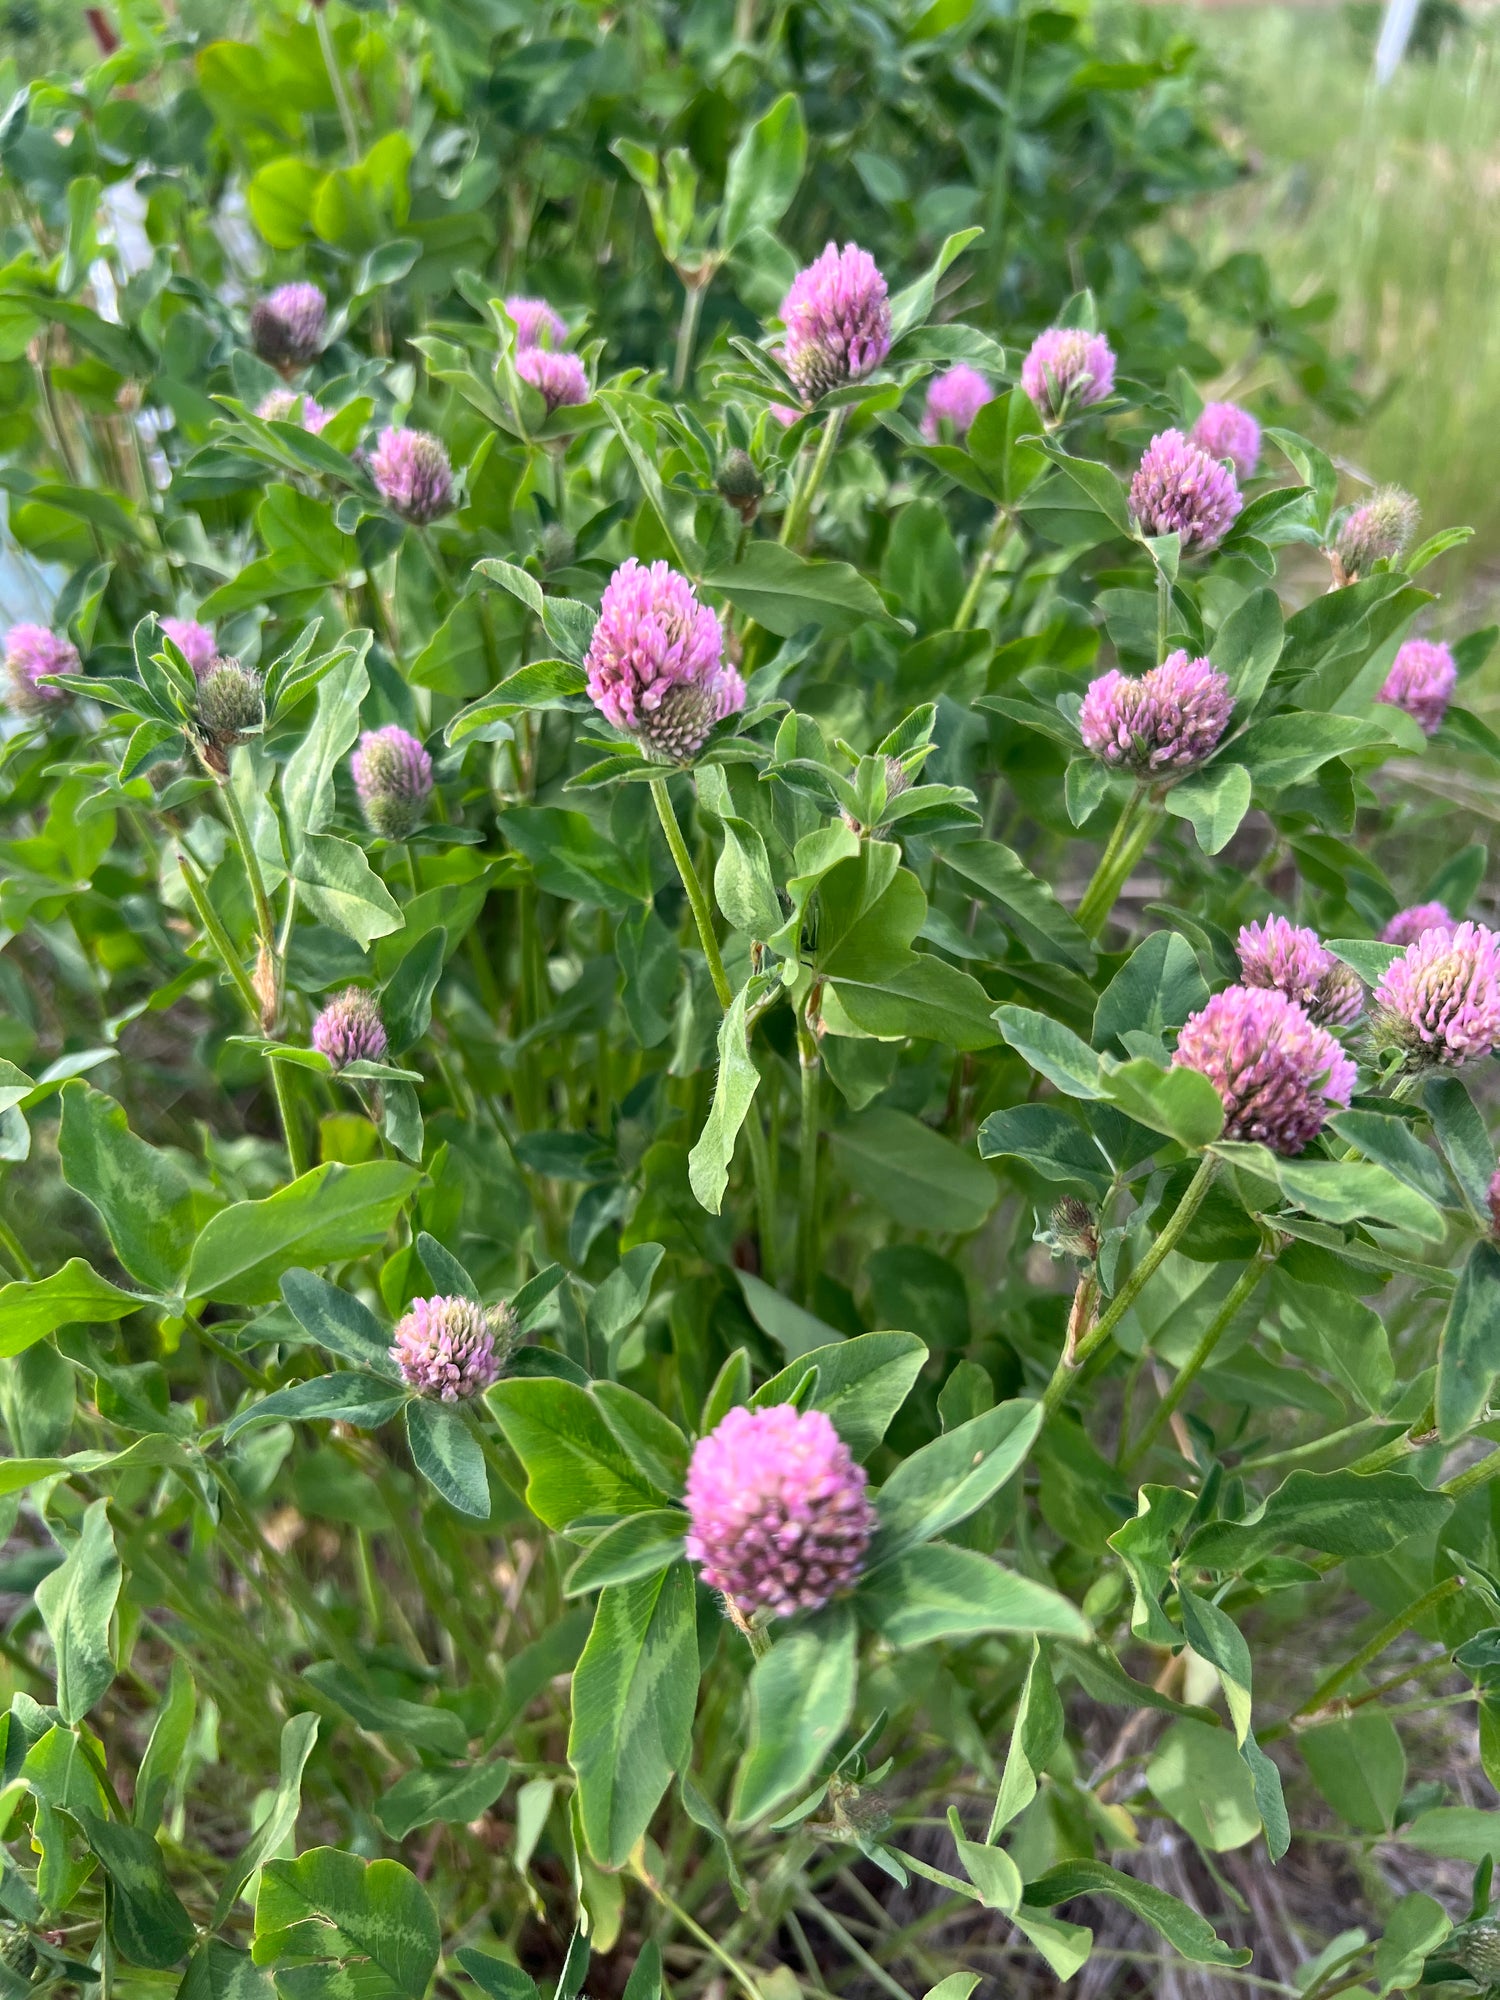 Vibrant image of red clover in full bloom, adding a splash of color to our Low Water Colorado Mountain Herb Farm